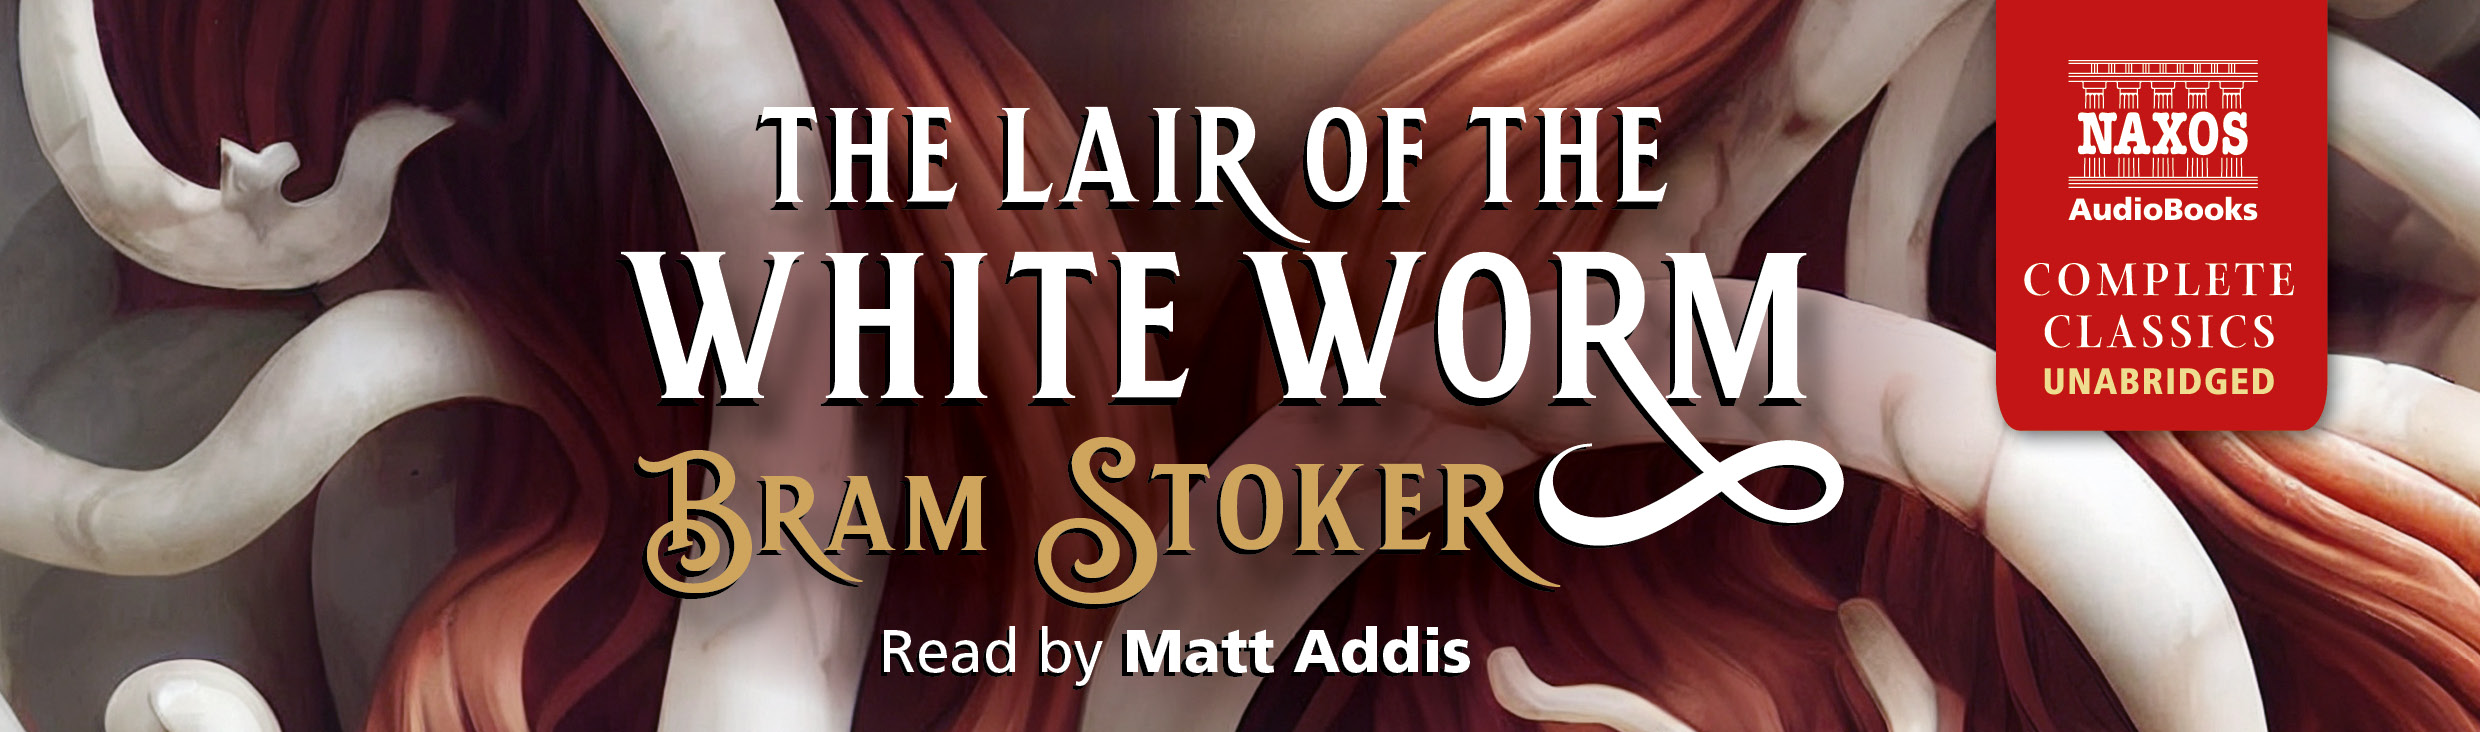 The Lair of the White Worm (unabridged)